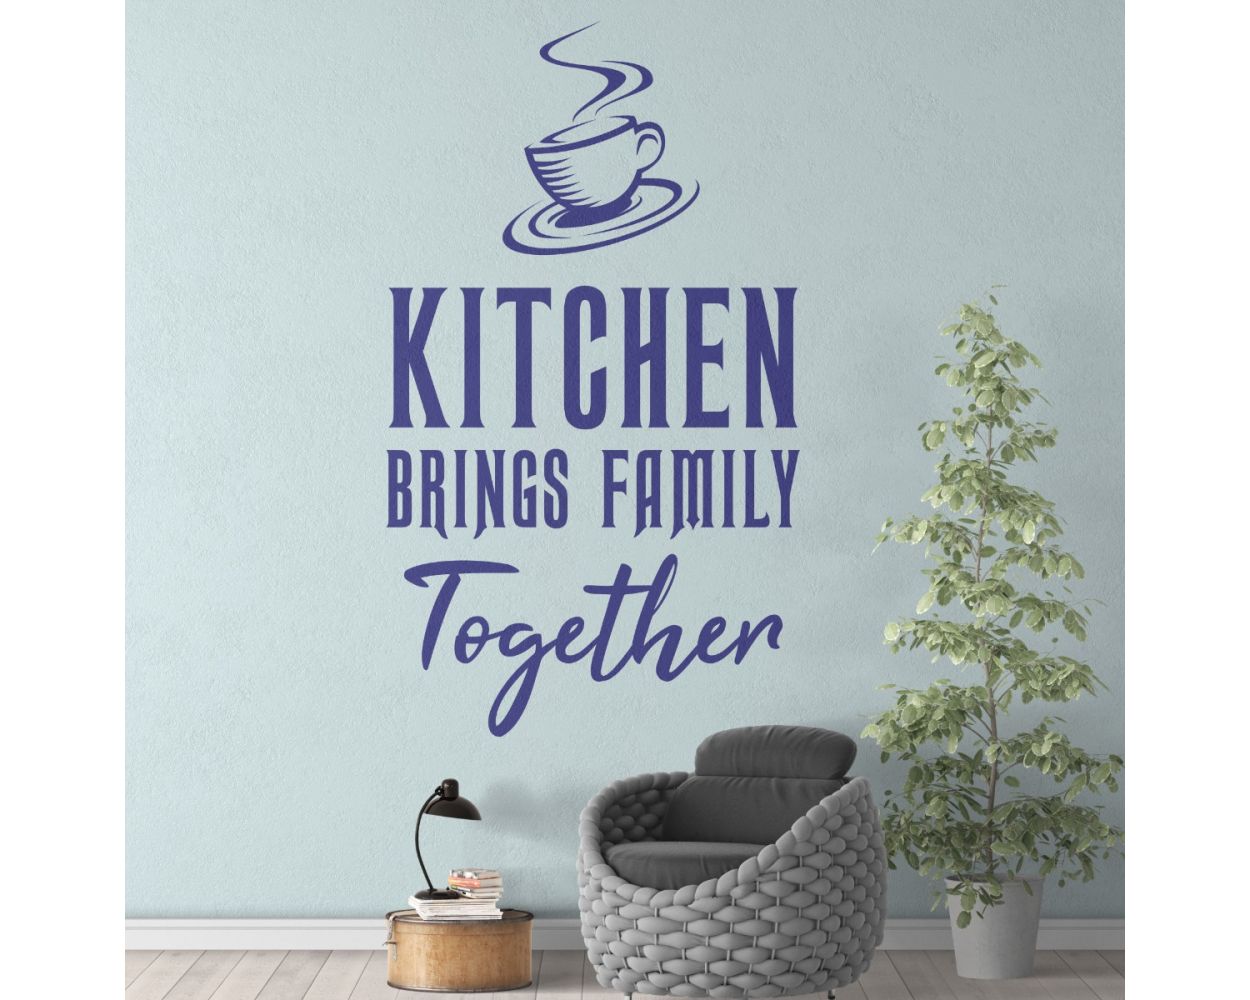 Best Kitchen Brings Family Together Quotes Kitchen Wall Stickers 